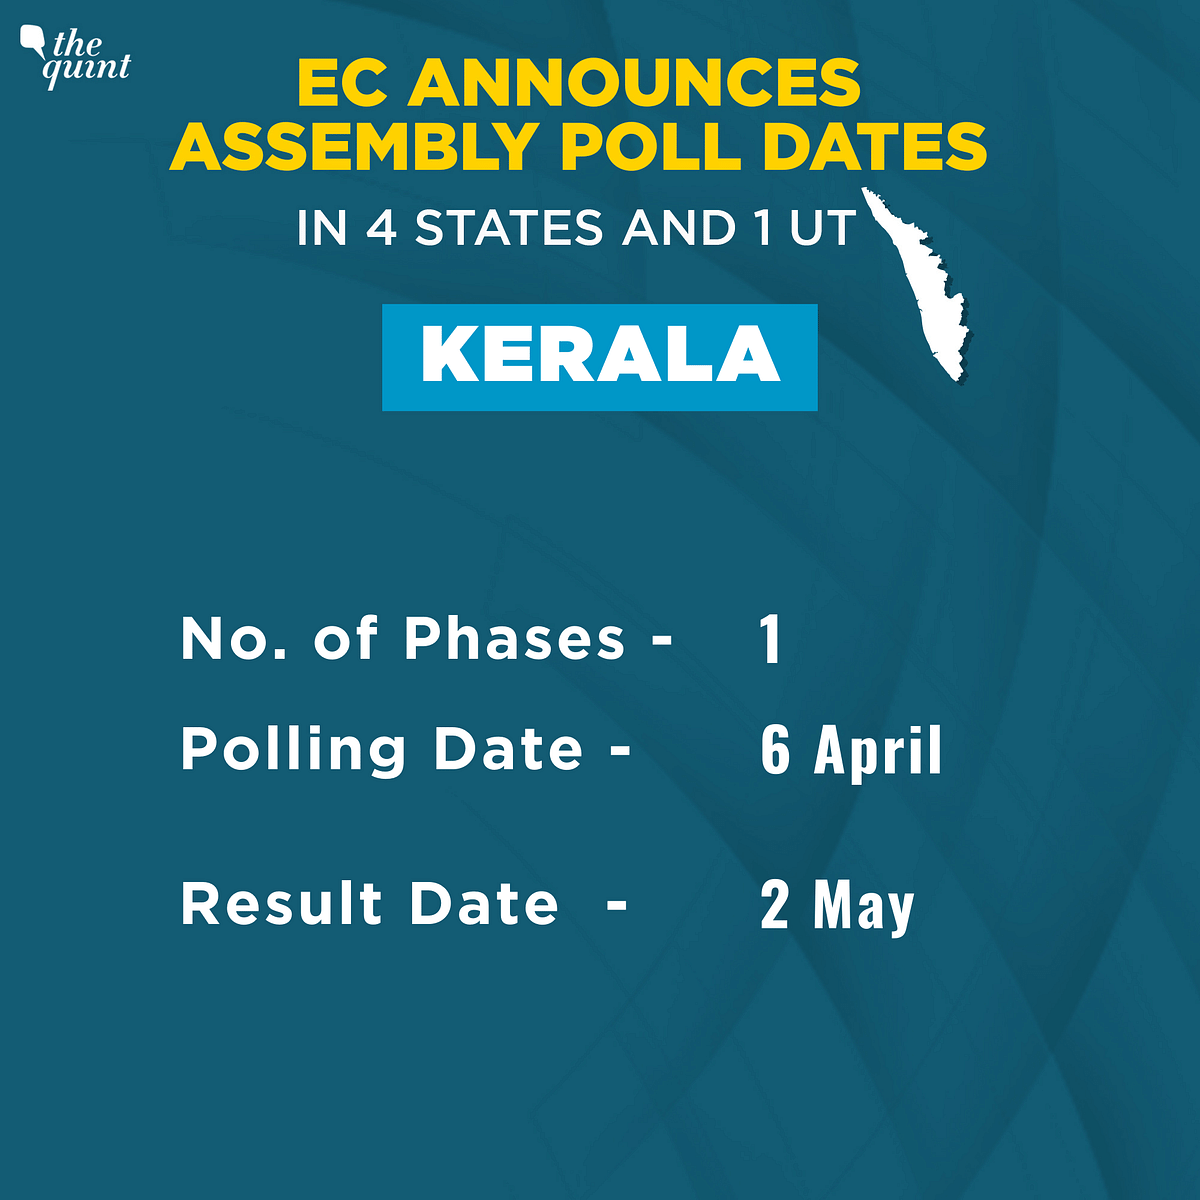 The Assembly elections in West Bengal, Assam, Kerala, Tamil Nadu, and Puducherry will kick off from 27 March.